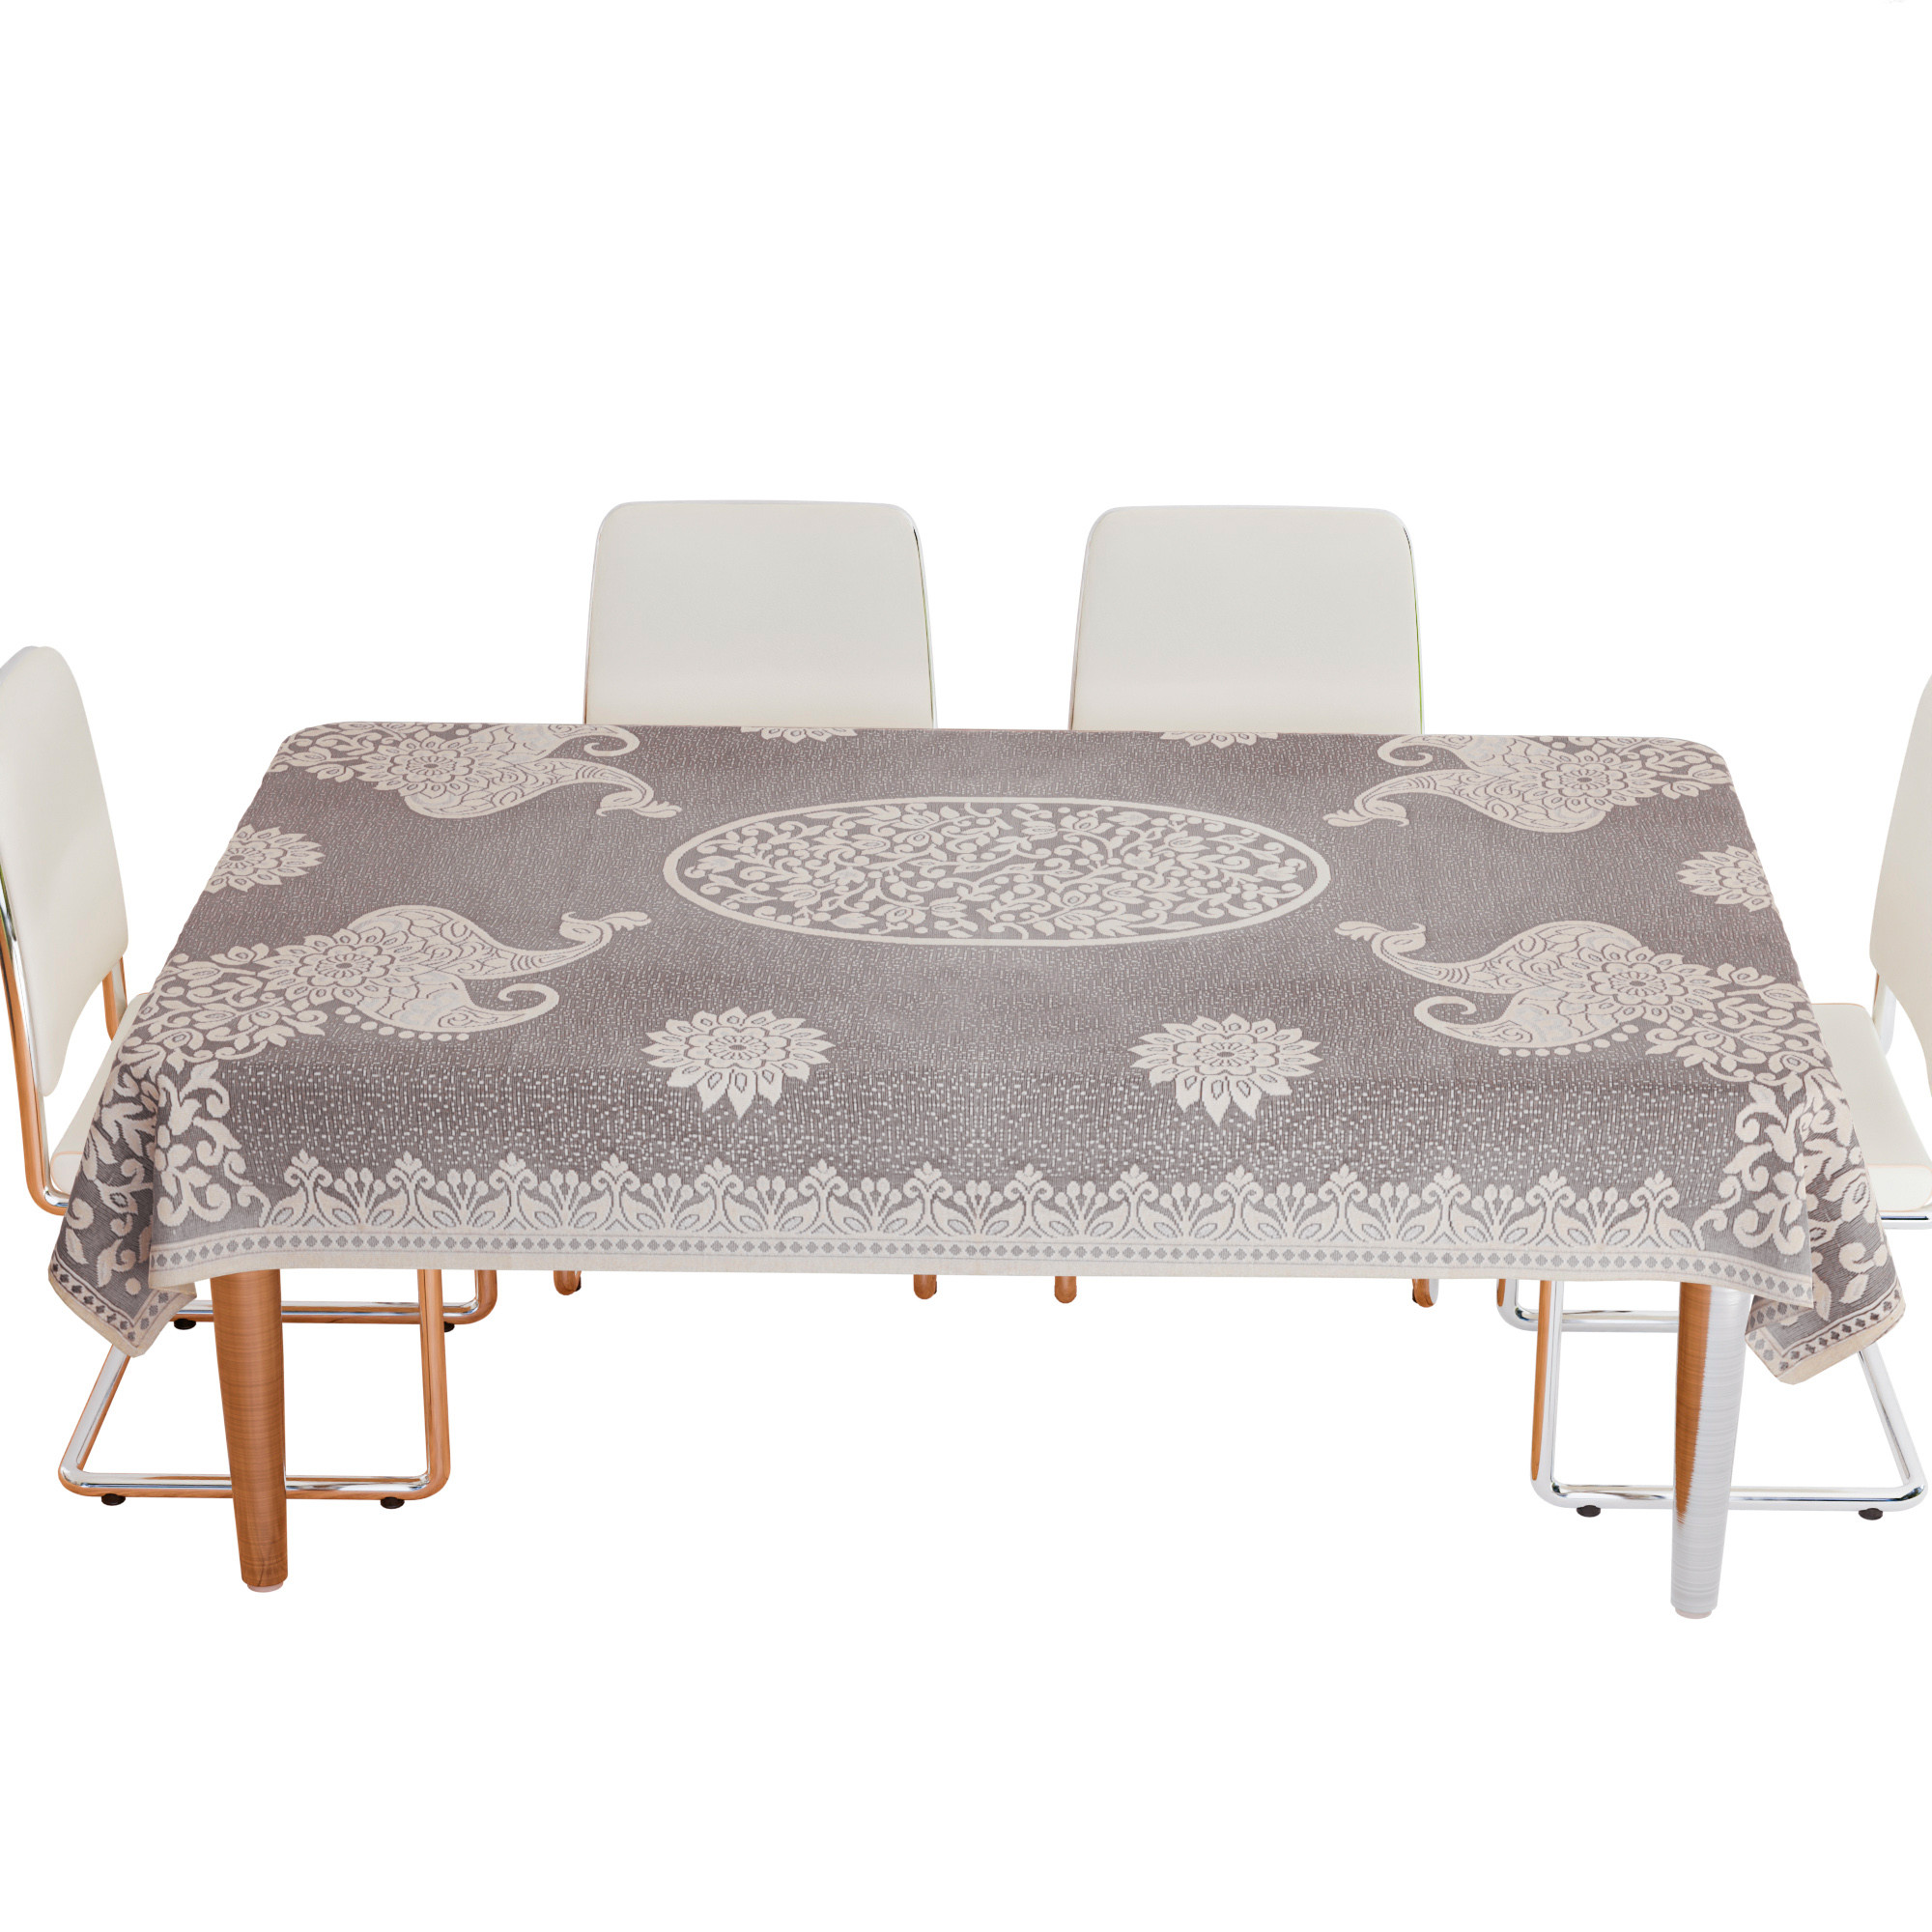 Kuber Industries Dining Table Cover | 6-Seater Table Cover | Net Table Protector Cover | Table Cover for Kitchen | Table Cover for Hall Décor | Peacock-Design | 60x90 Inch | DTC | Brown